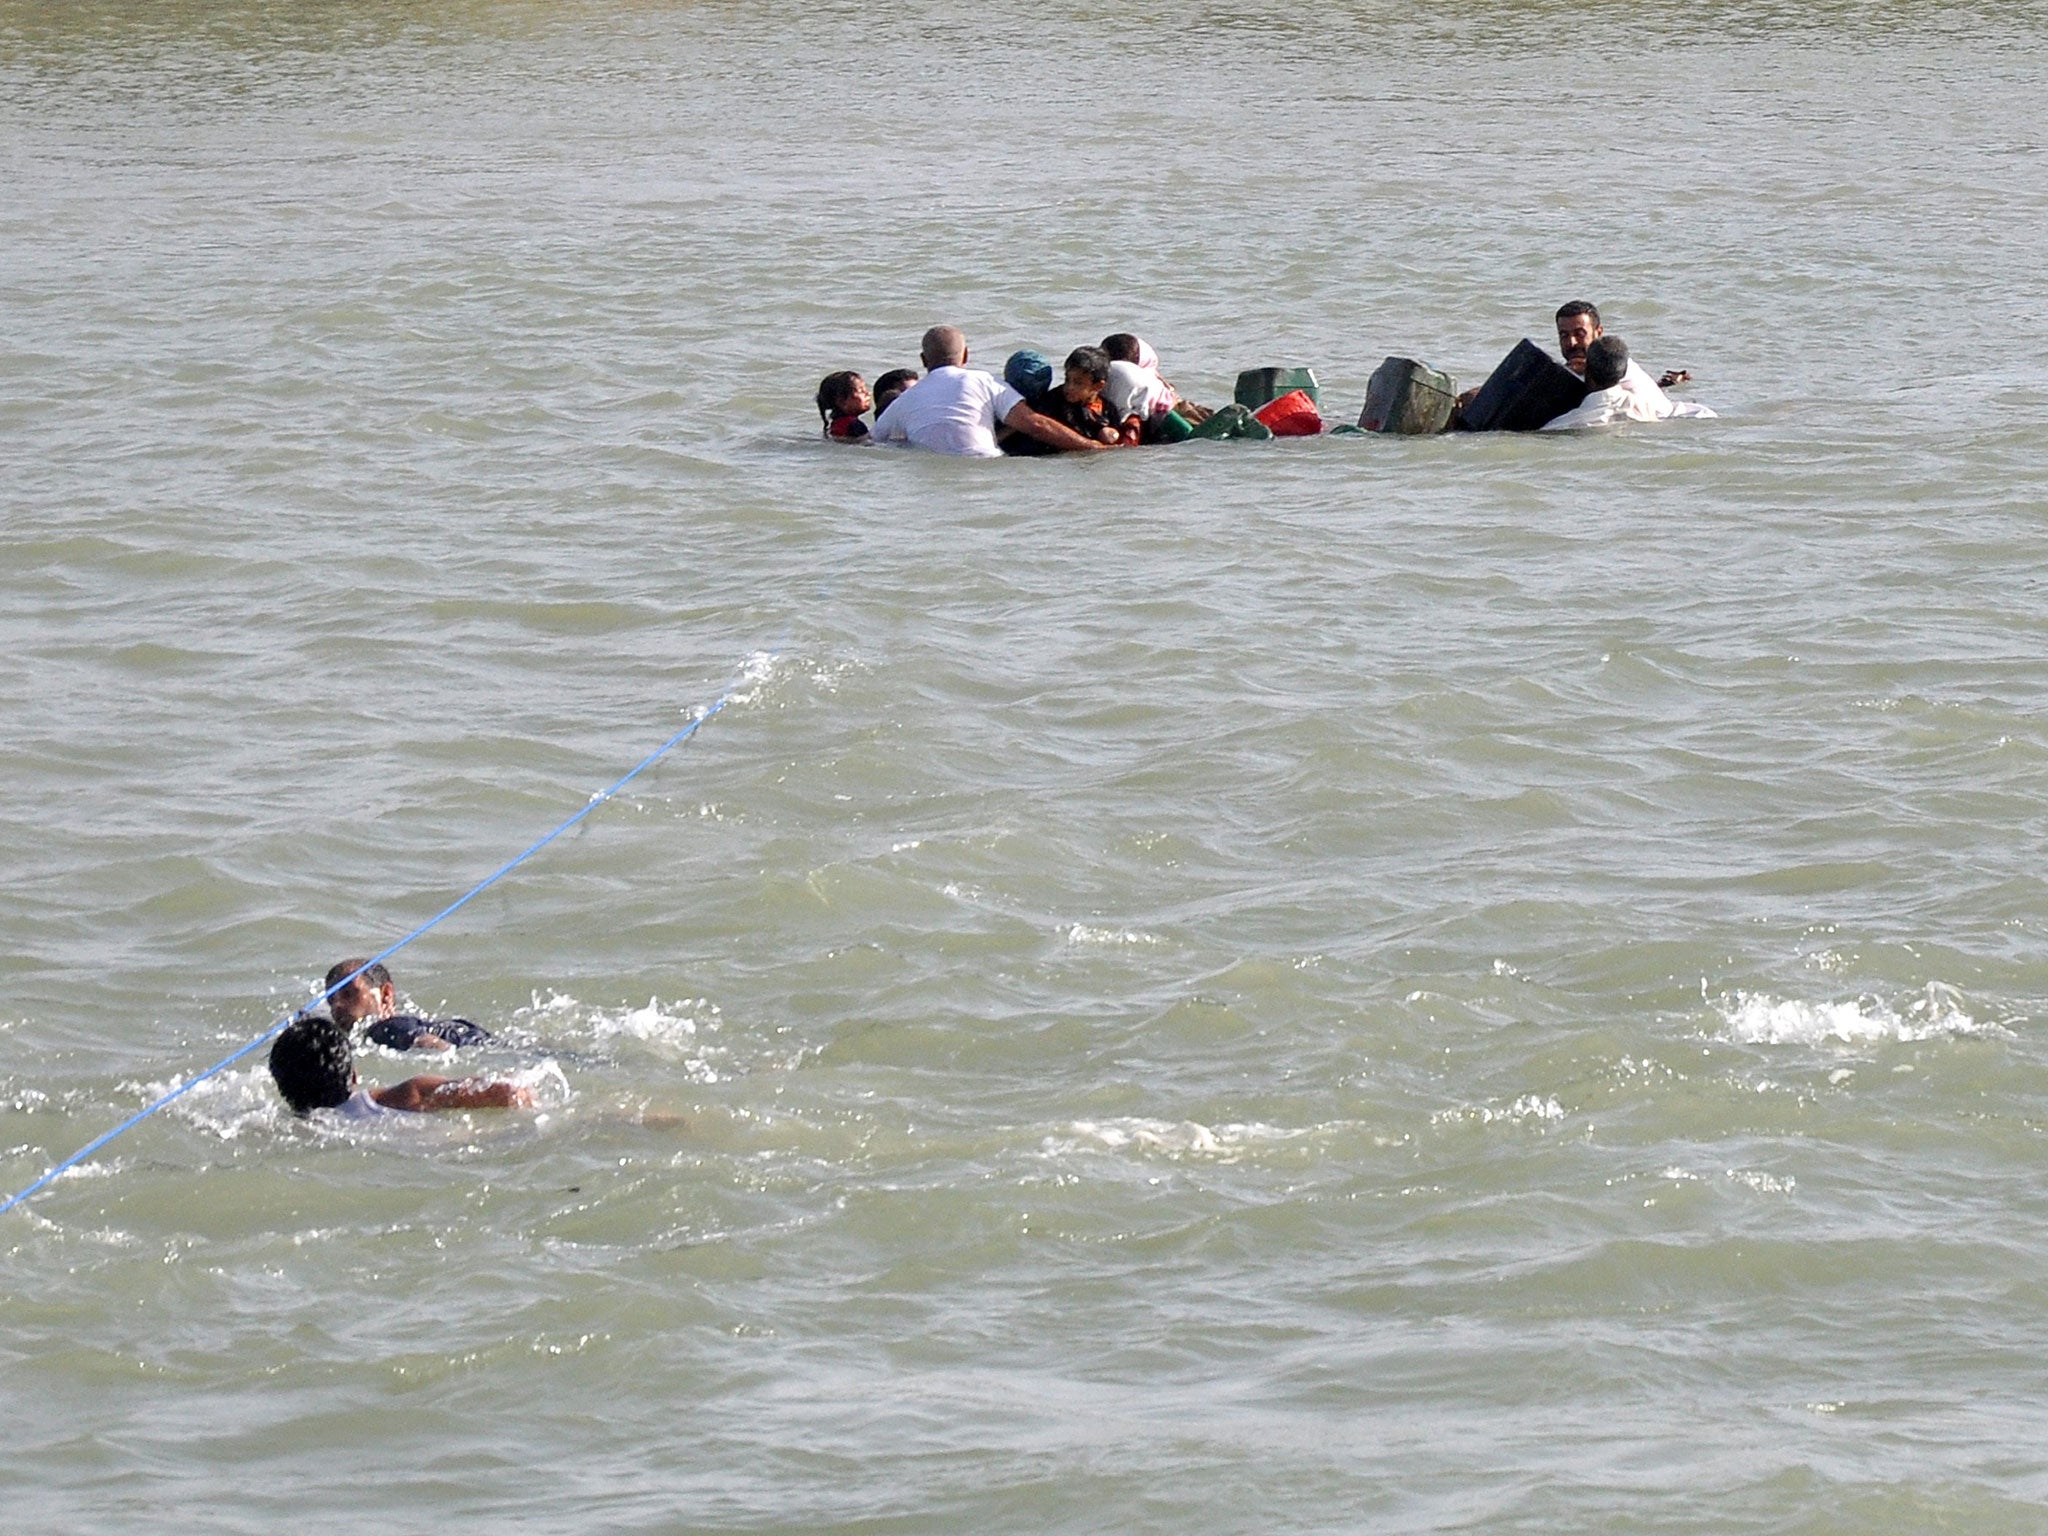 Internally displaced civilians from Fallujah flee their homes by crossing Euphrates River